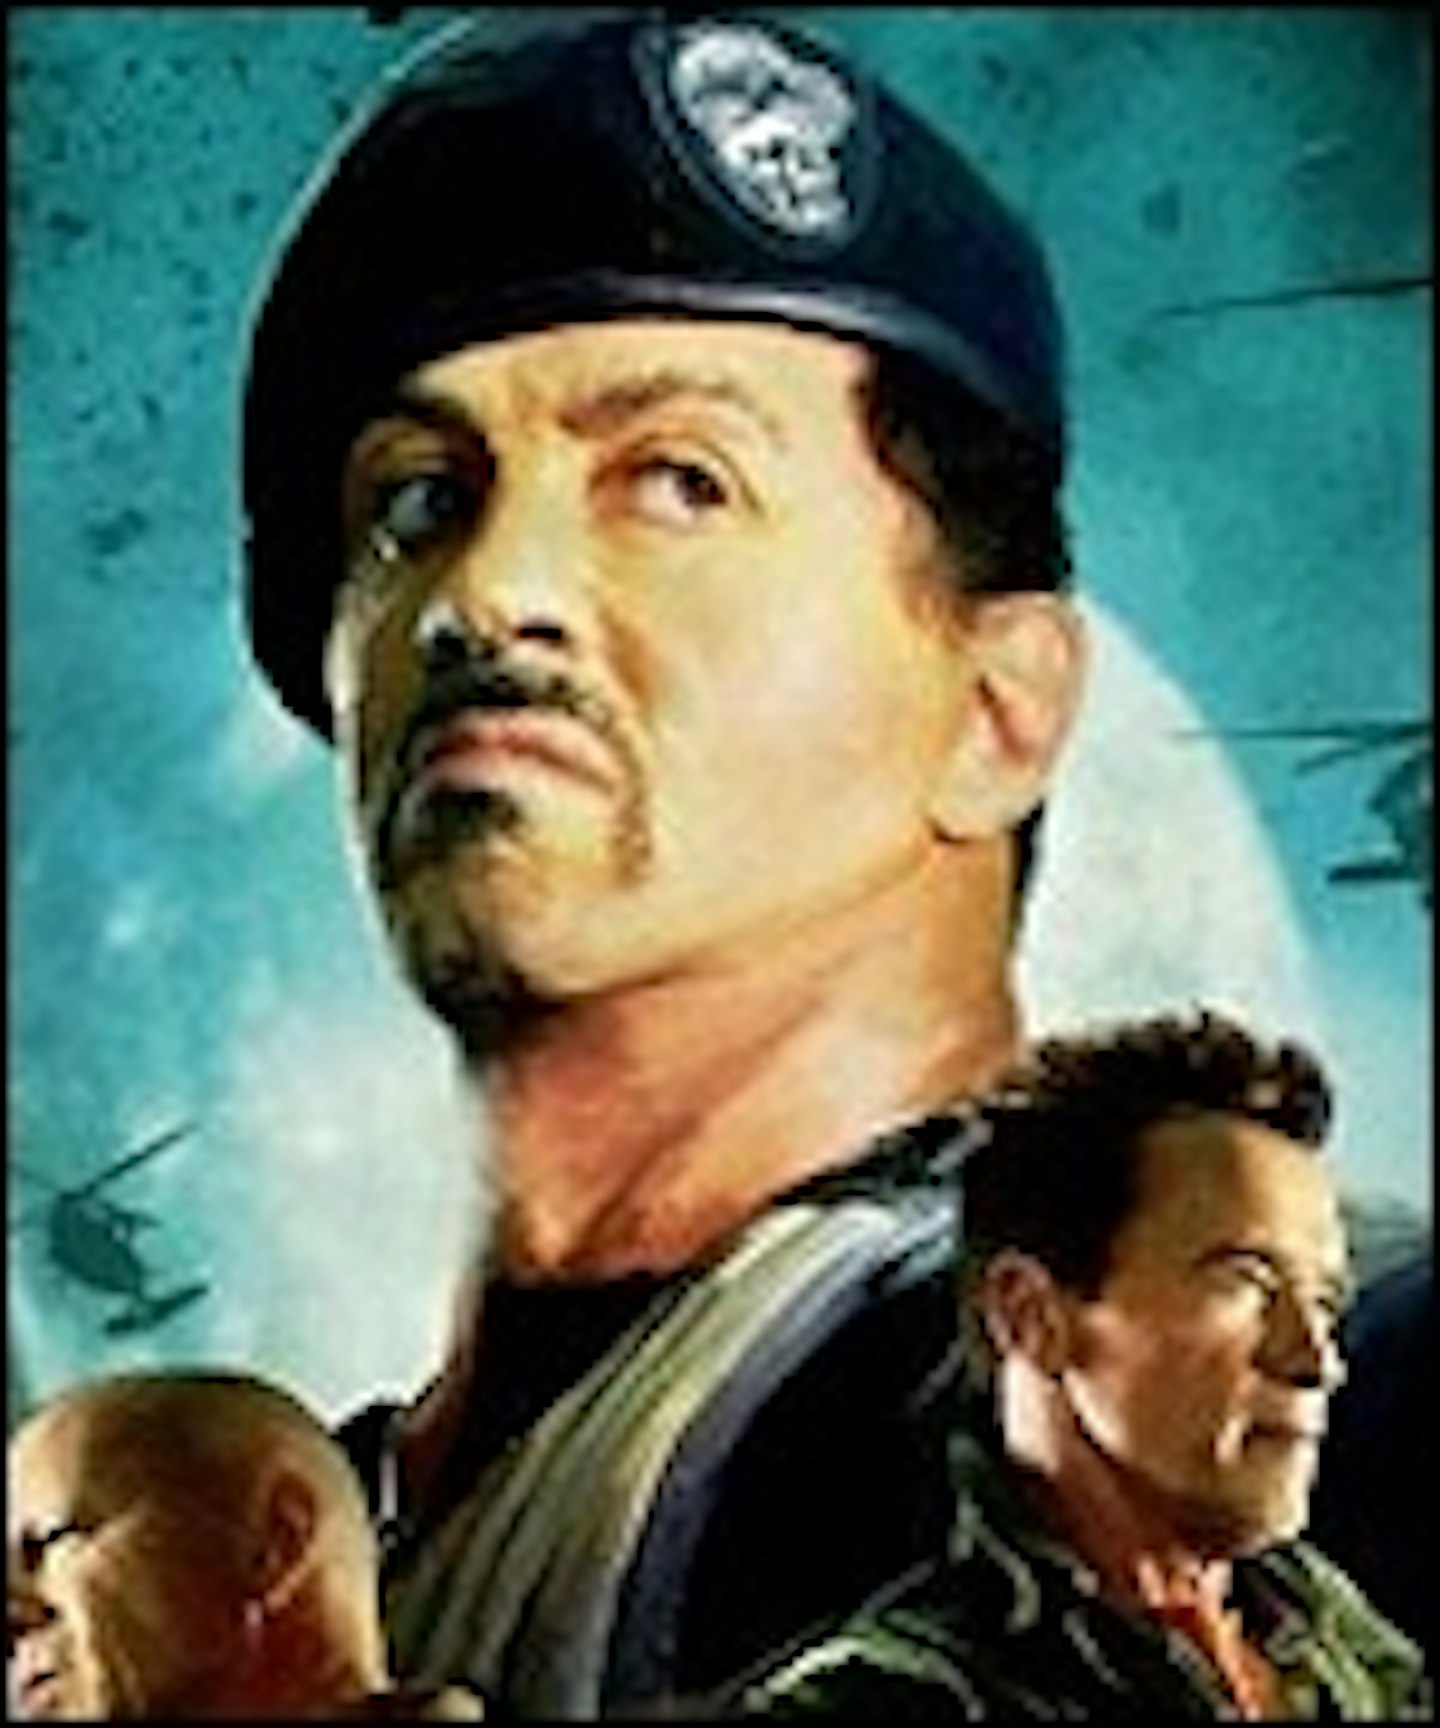 Expendables 2 Comic-Con Poster Lands